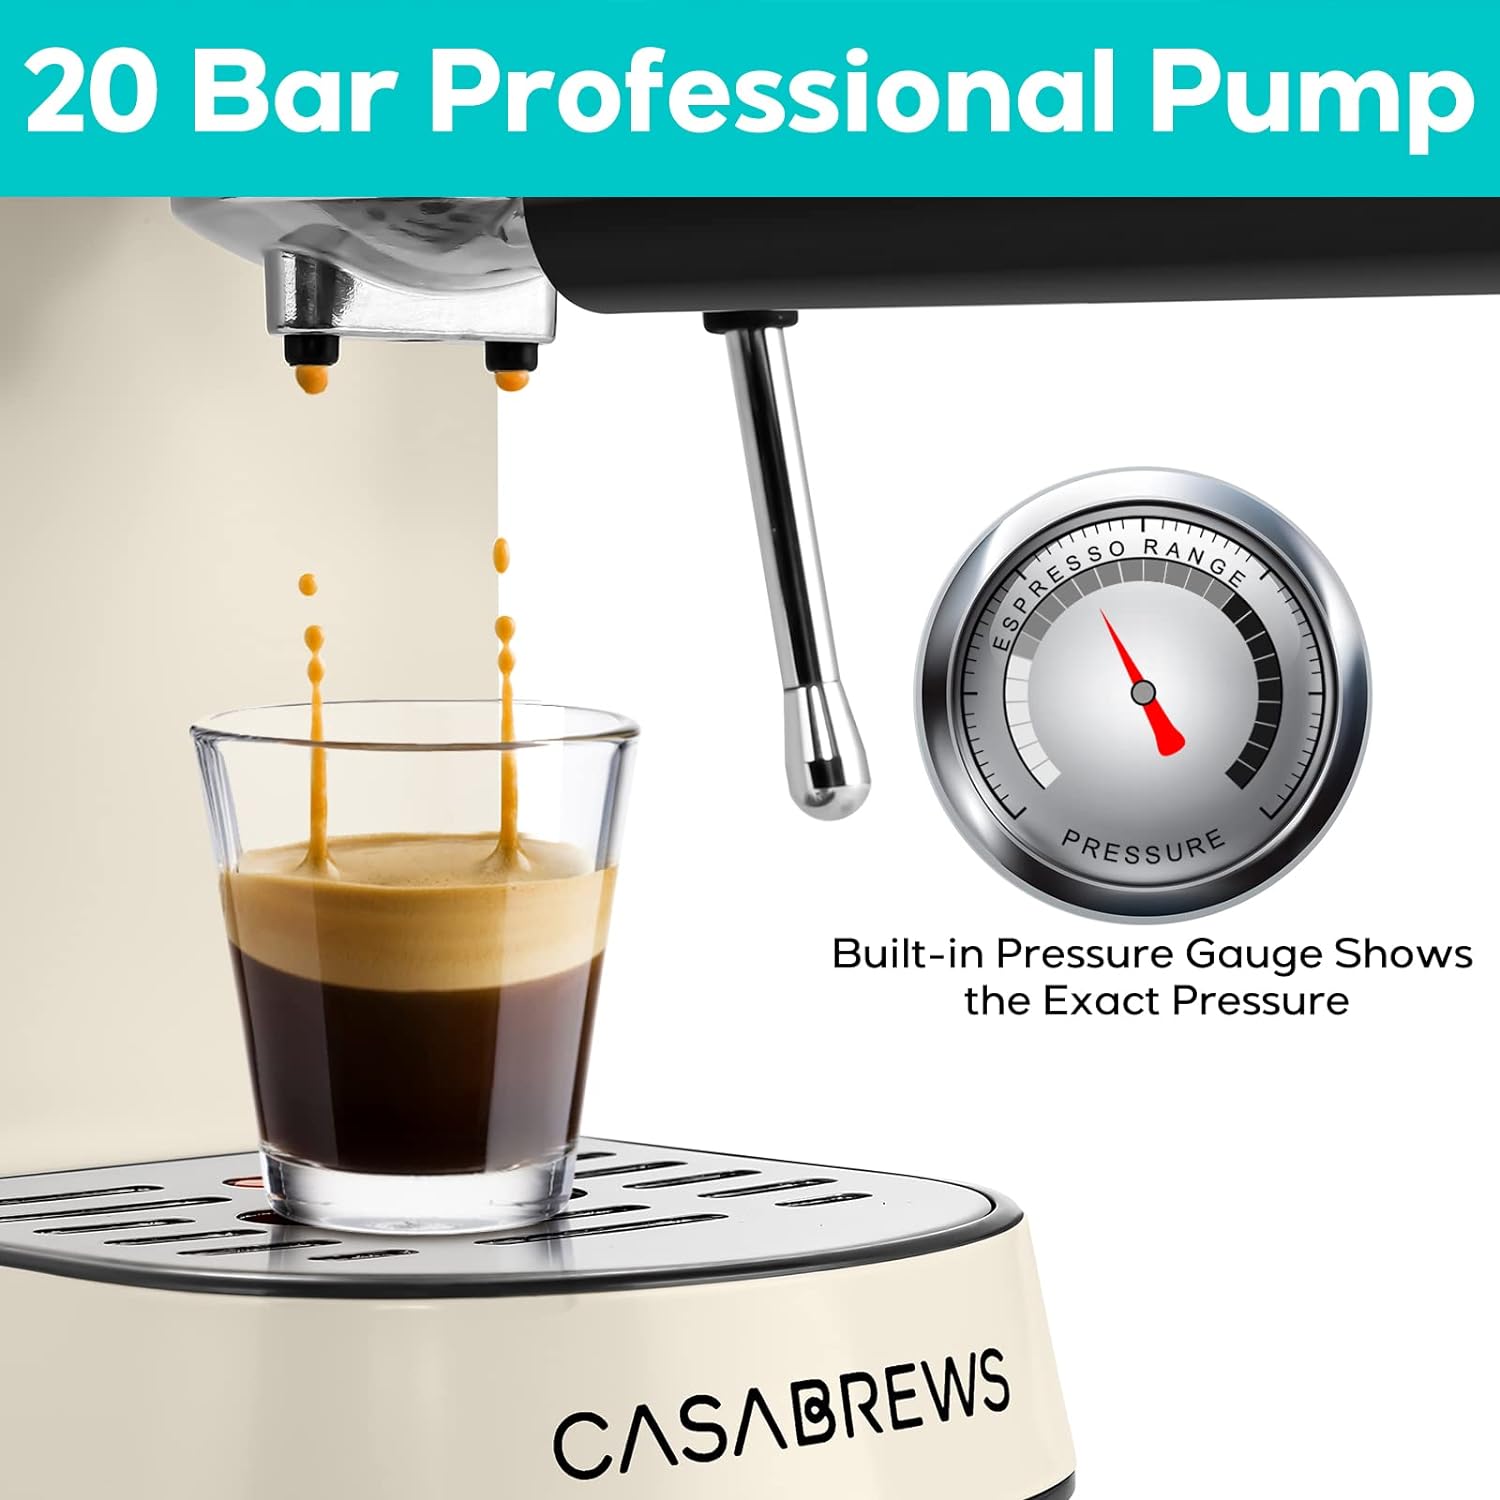 CASABREWS Espresso Machine 20 Bar, Professional Espresso Maker with Milk Frother Steam Wand, Compact Coffee Machine with 34oz Removable Water Tank for Cappuccino, Latte, Gift for Dad or Mom